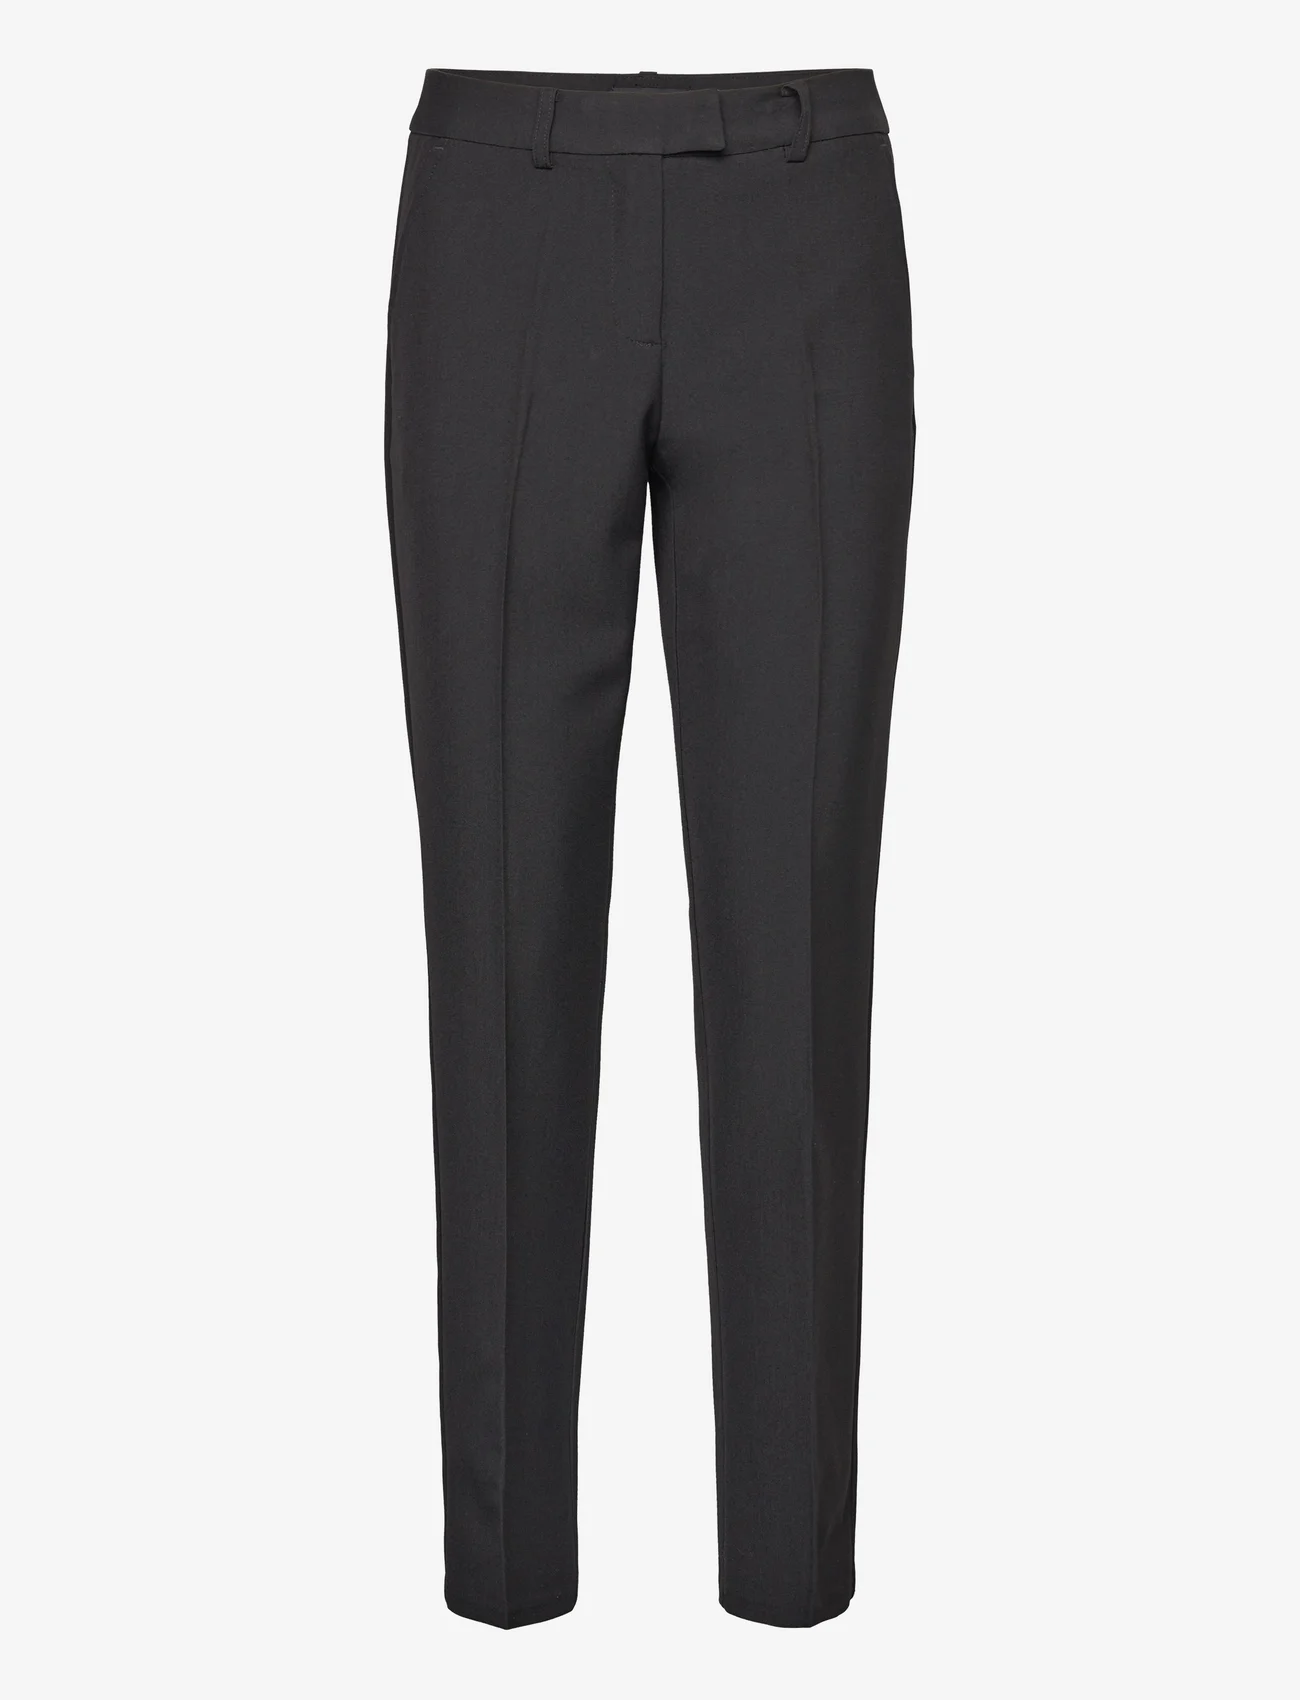 Brandtex - Suiting pants - tailored trousers - black - 0